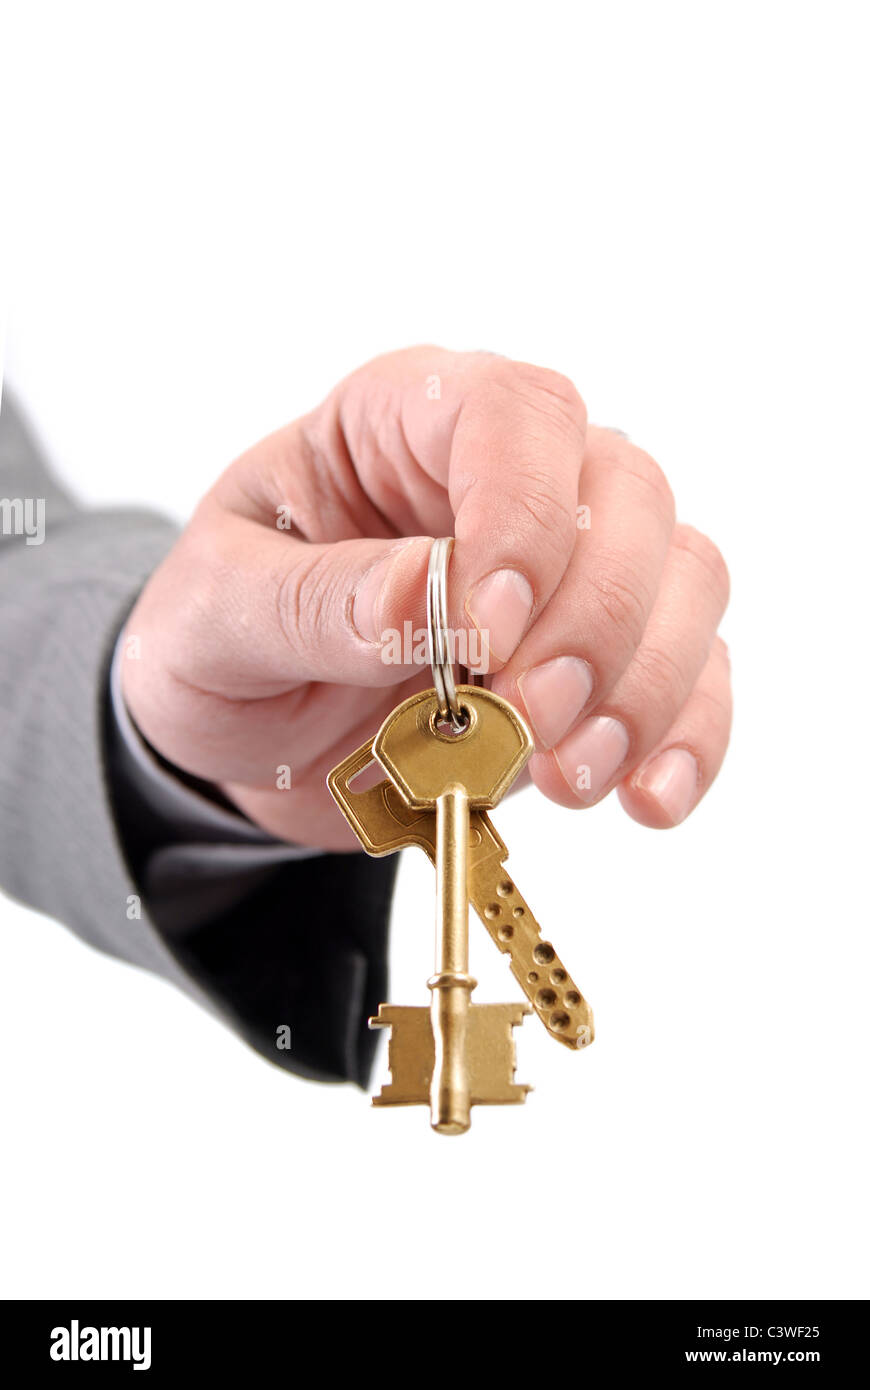 Close-up picture of a male real estate executive's hand holding two keys. Stock Photo